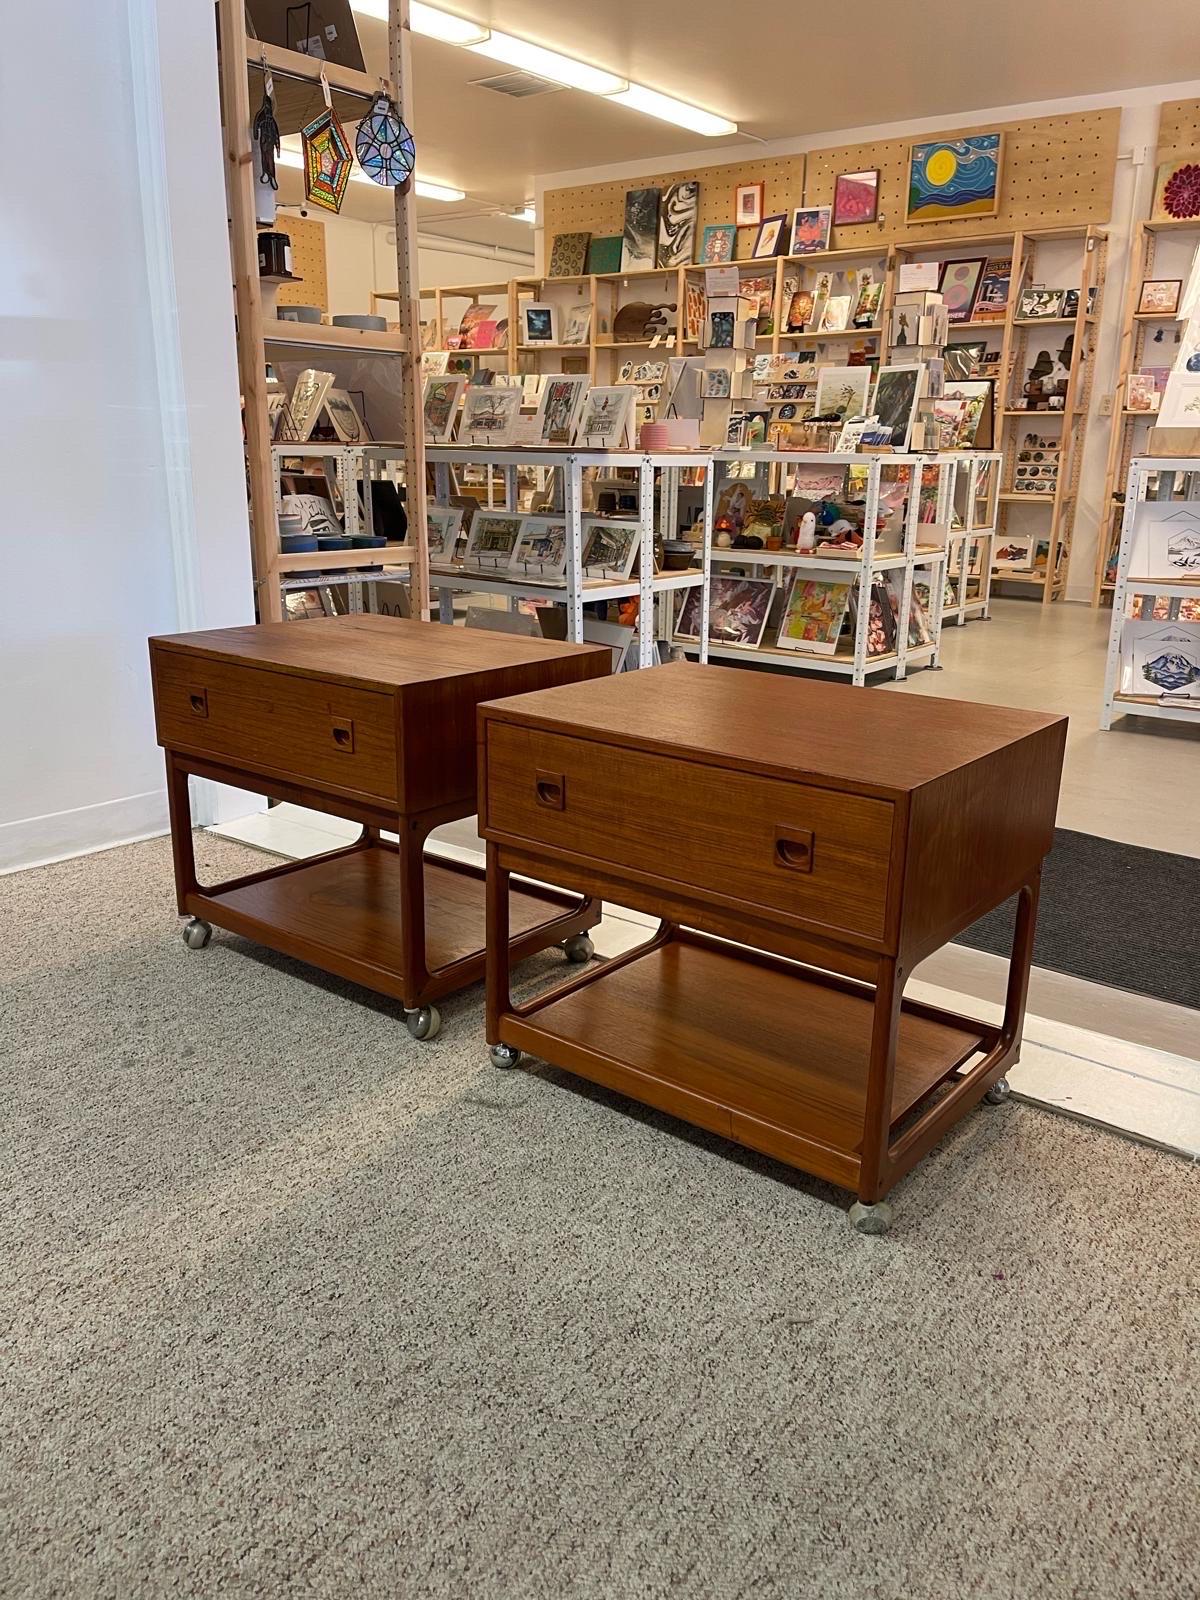 Pair of Danish End Tables with Beautiful Carved wood handles. Dovetail Drawers with dividers as shown.Curved Danish Modern style lines to the legs. Circa 1960s/ 1970s .Vintage Condition Consistent with Age as Pictured.

Dimensions. 24 W ; 18 D ; 21 H